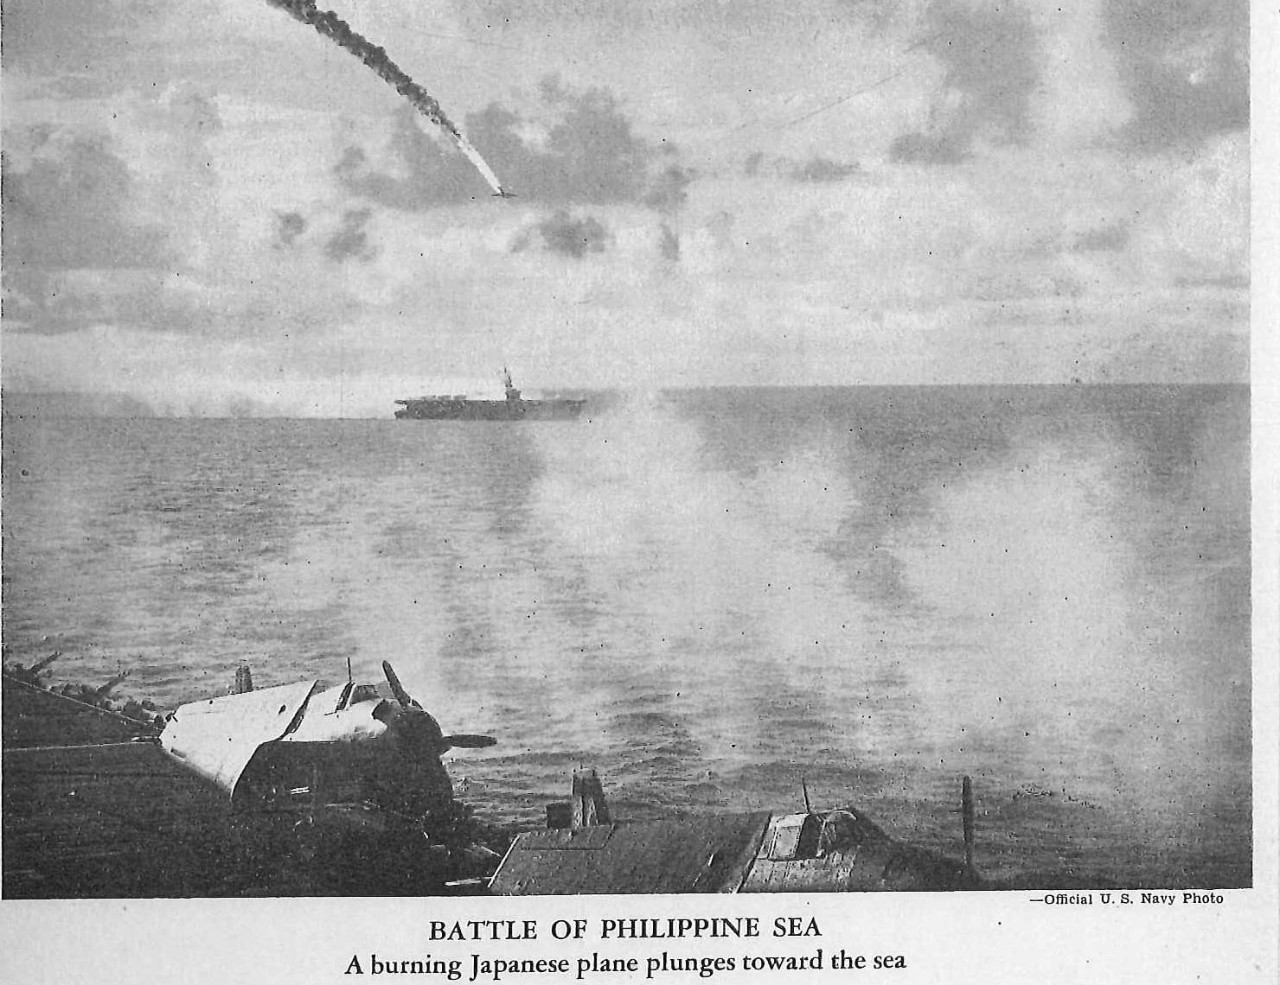 Battle of Philippine Sea, a burning Japanese plane plunges toward the sea